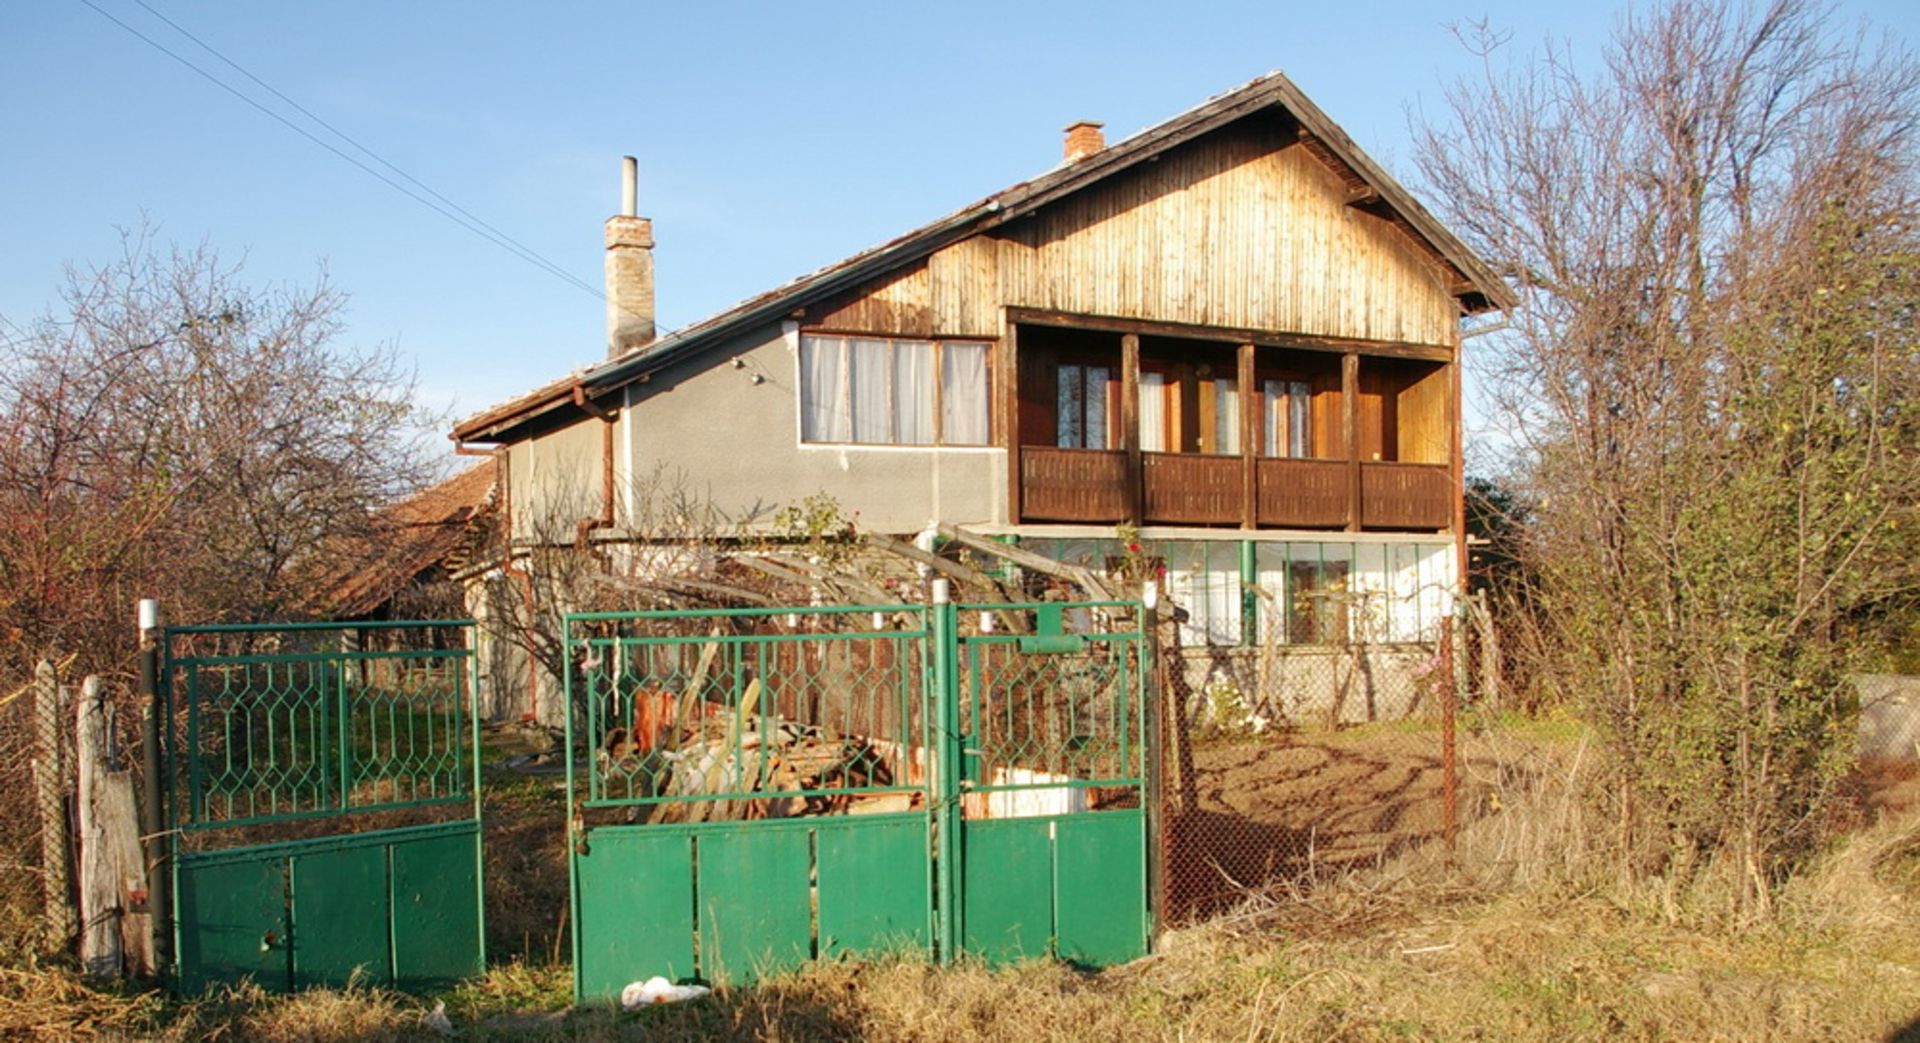 SIX ROOM VILLA AND 1,850 SQM OF LAND IN BULGARIA - Image 23 of 24